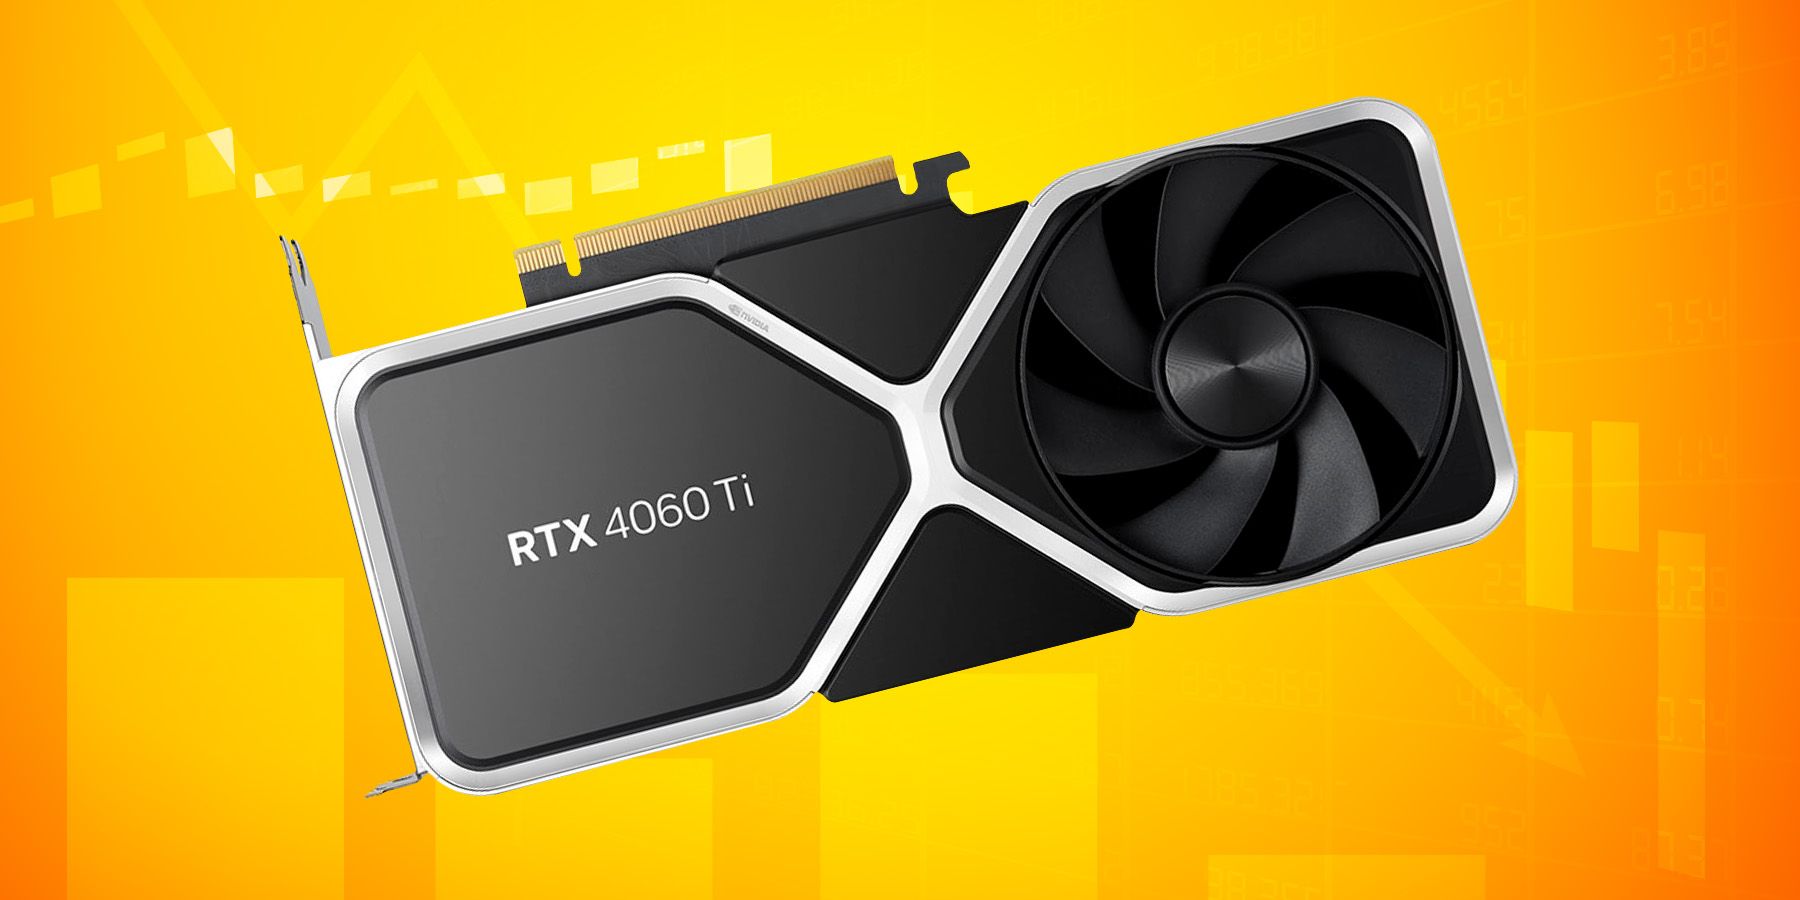 Nvidia GeForce RTX 4060 Ti 16GB Reviewed, Benchmarked